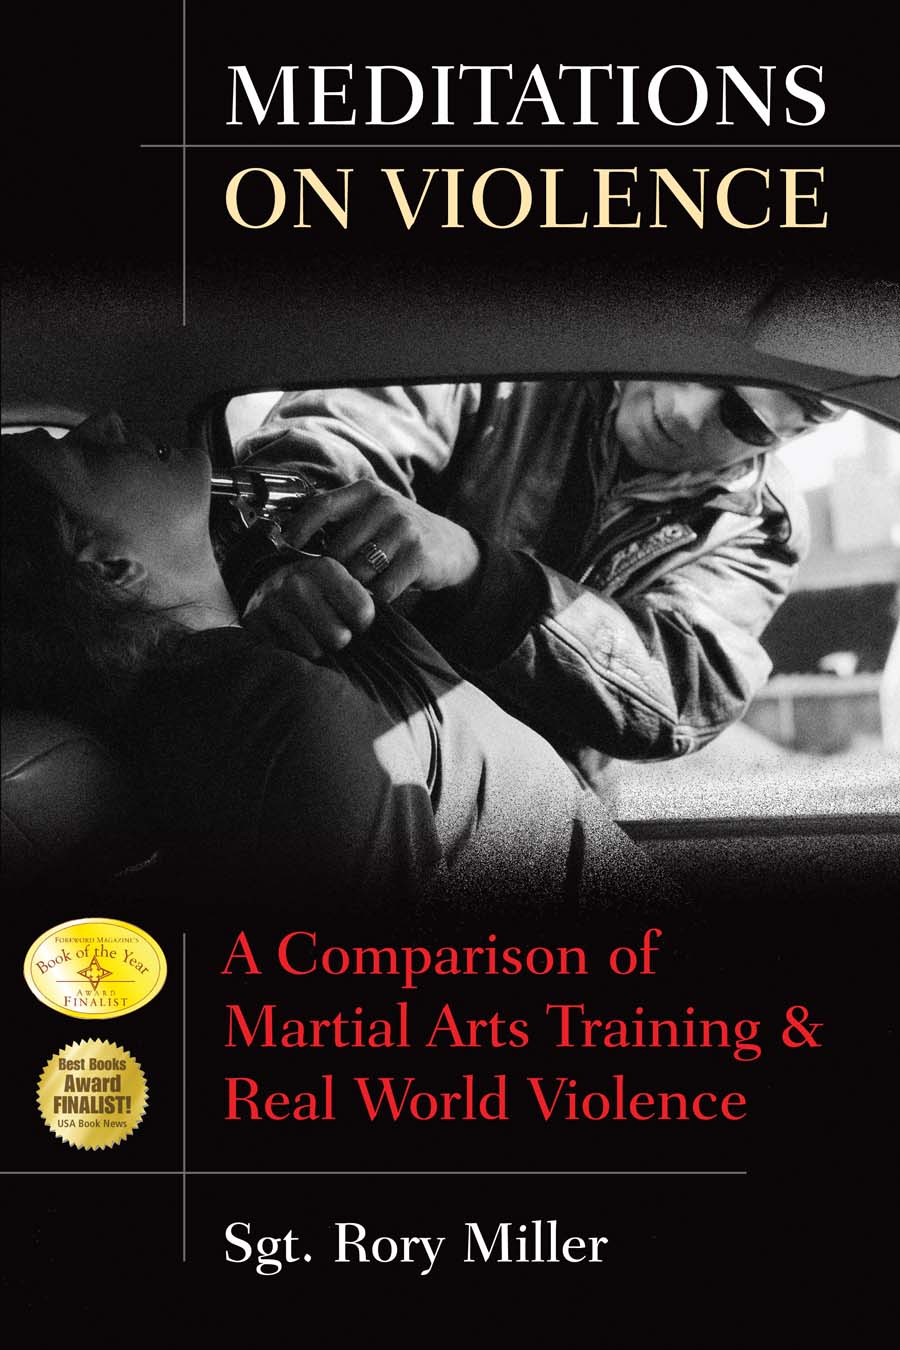 Meditations on Violence—A Comparison of Martial Arts Training and Real World Violence Book by Rory Miller